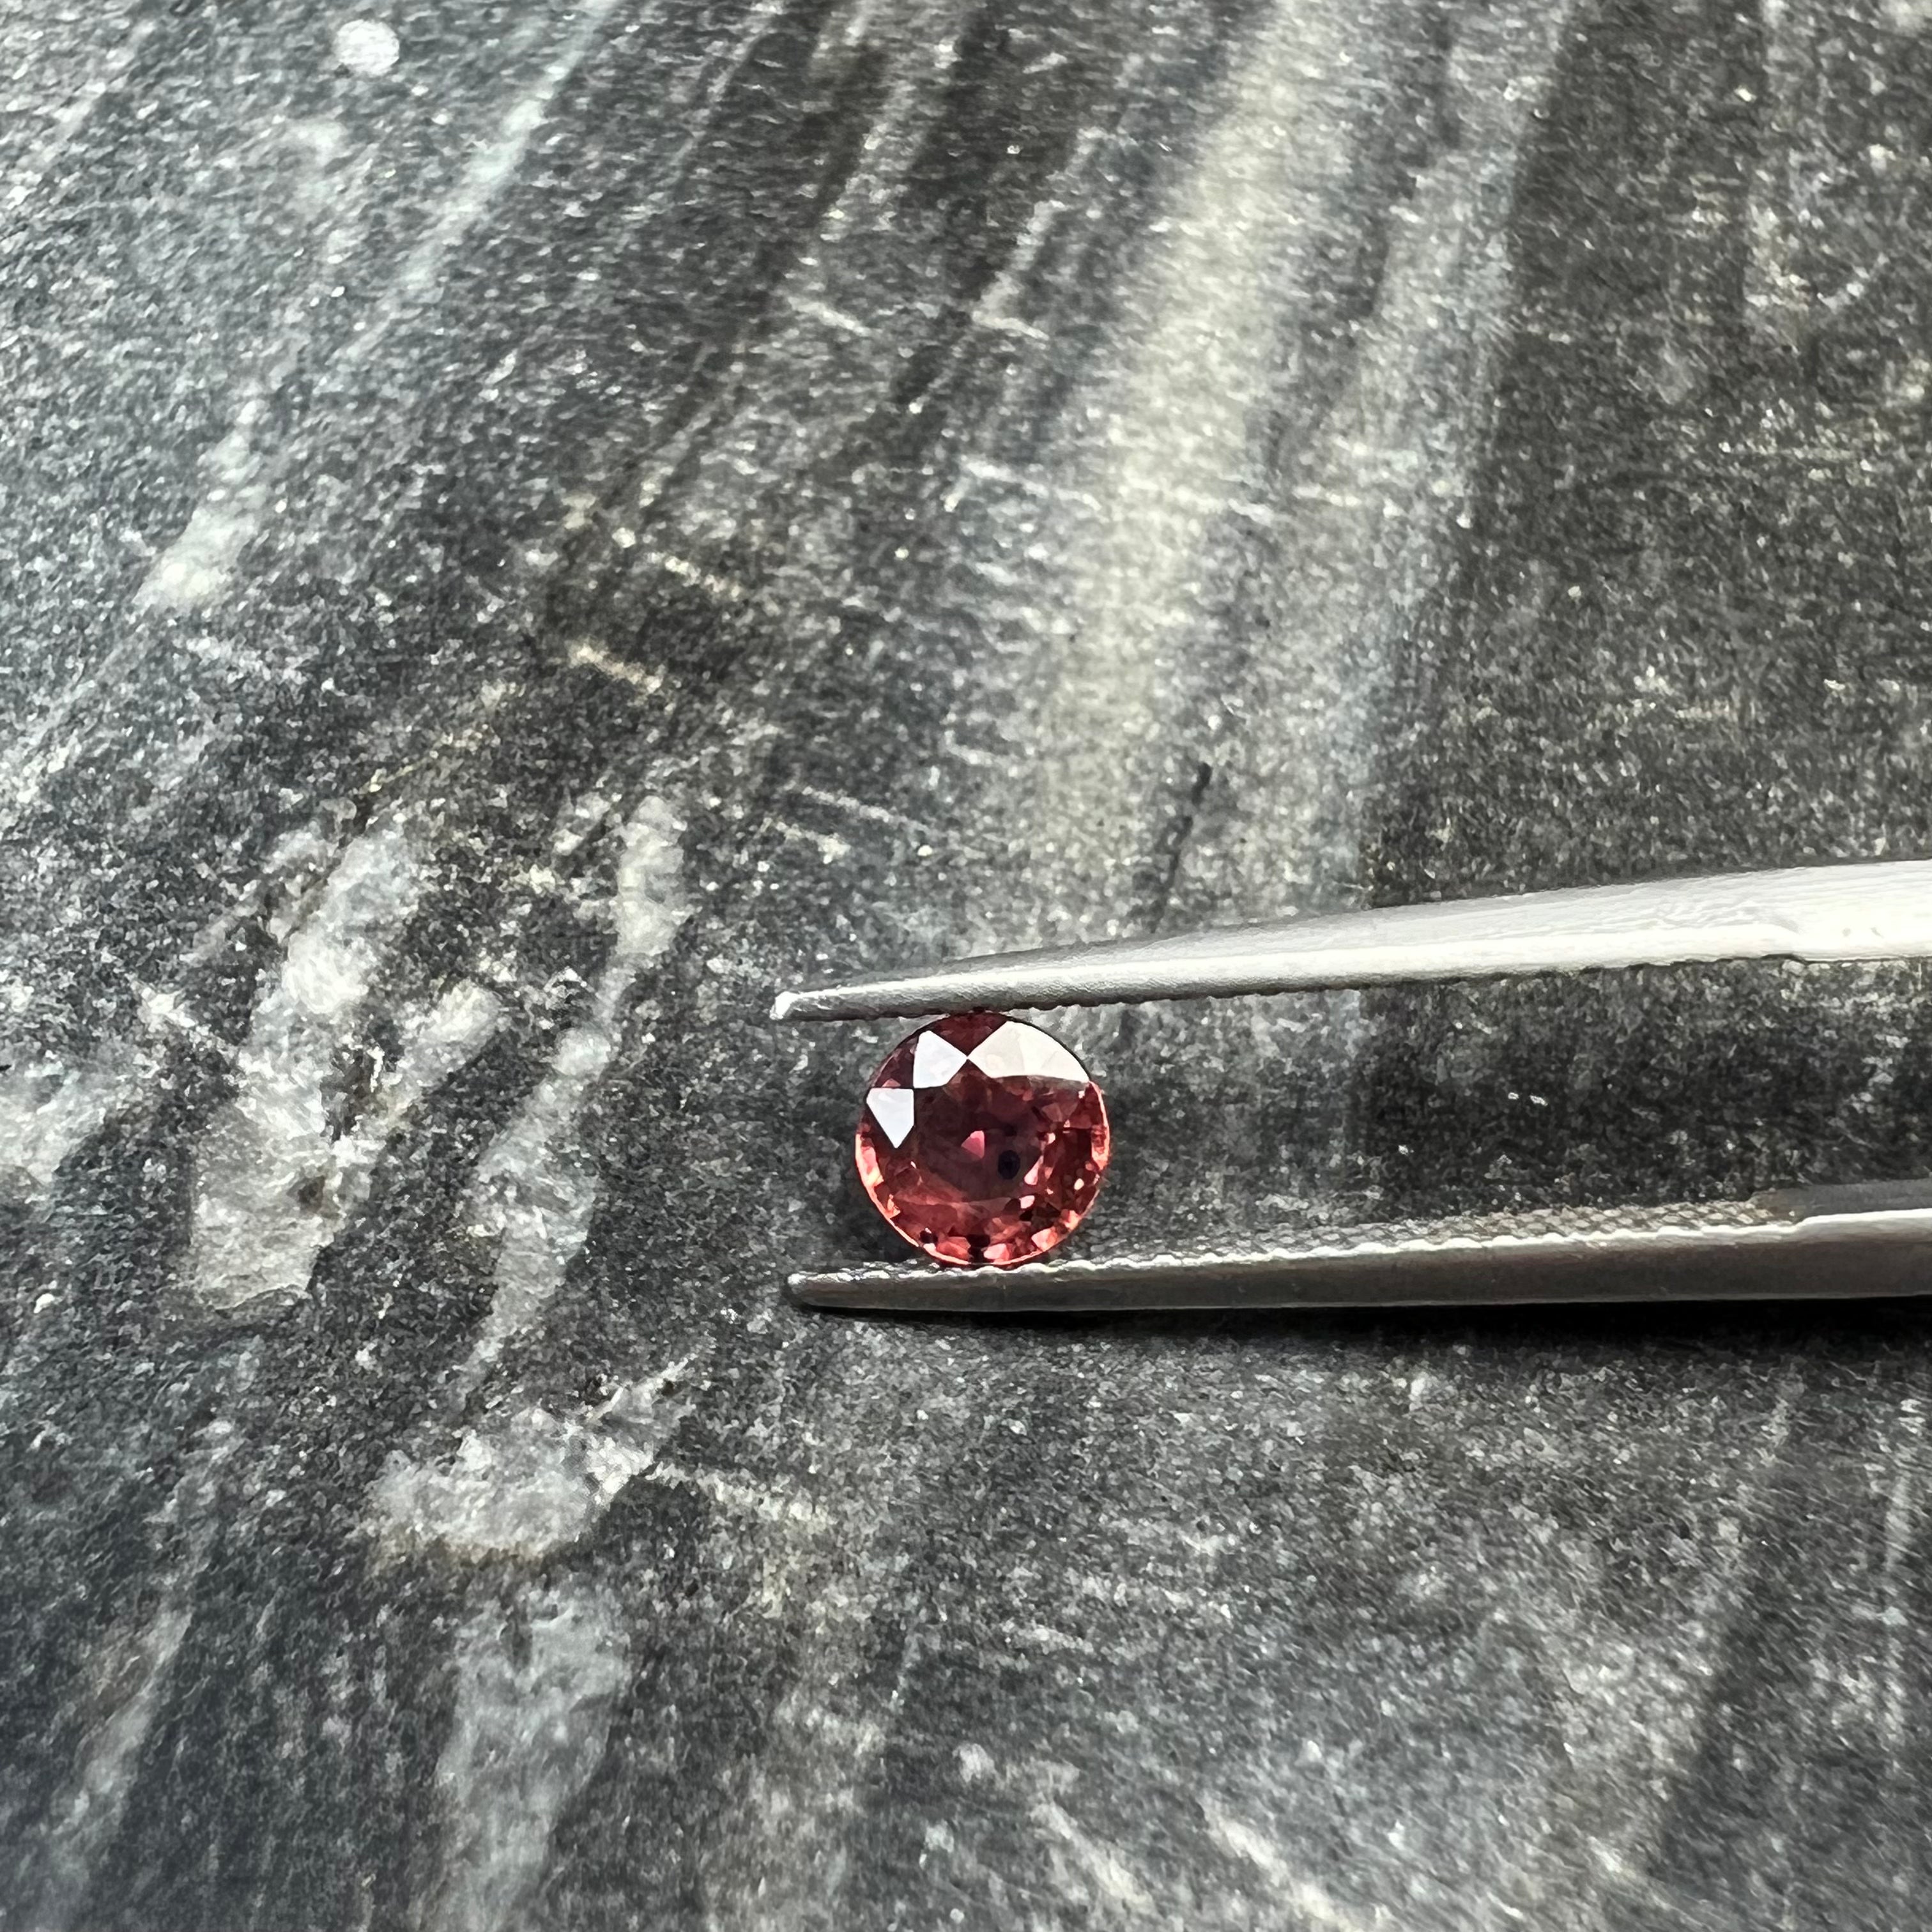 .60CT Loose Round Red Sapphire 4.84x3.03mm Earth mined Gemstone